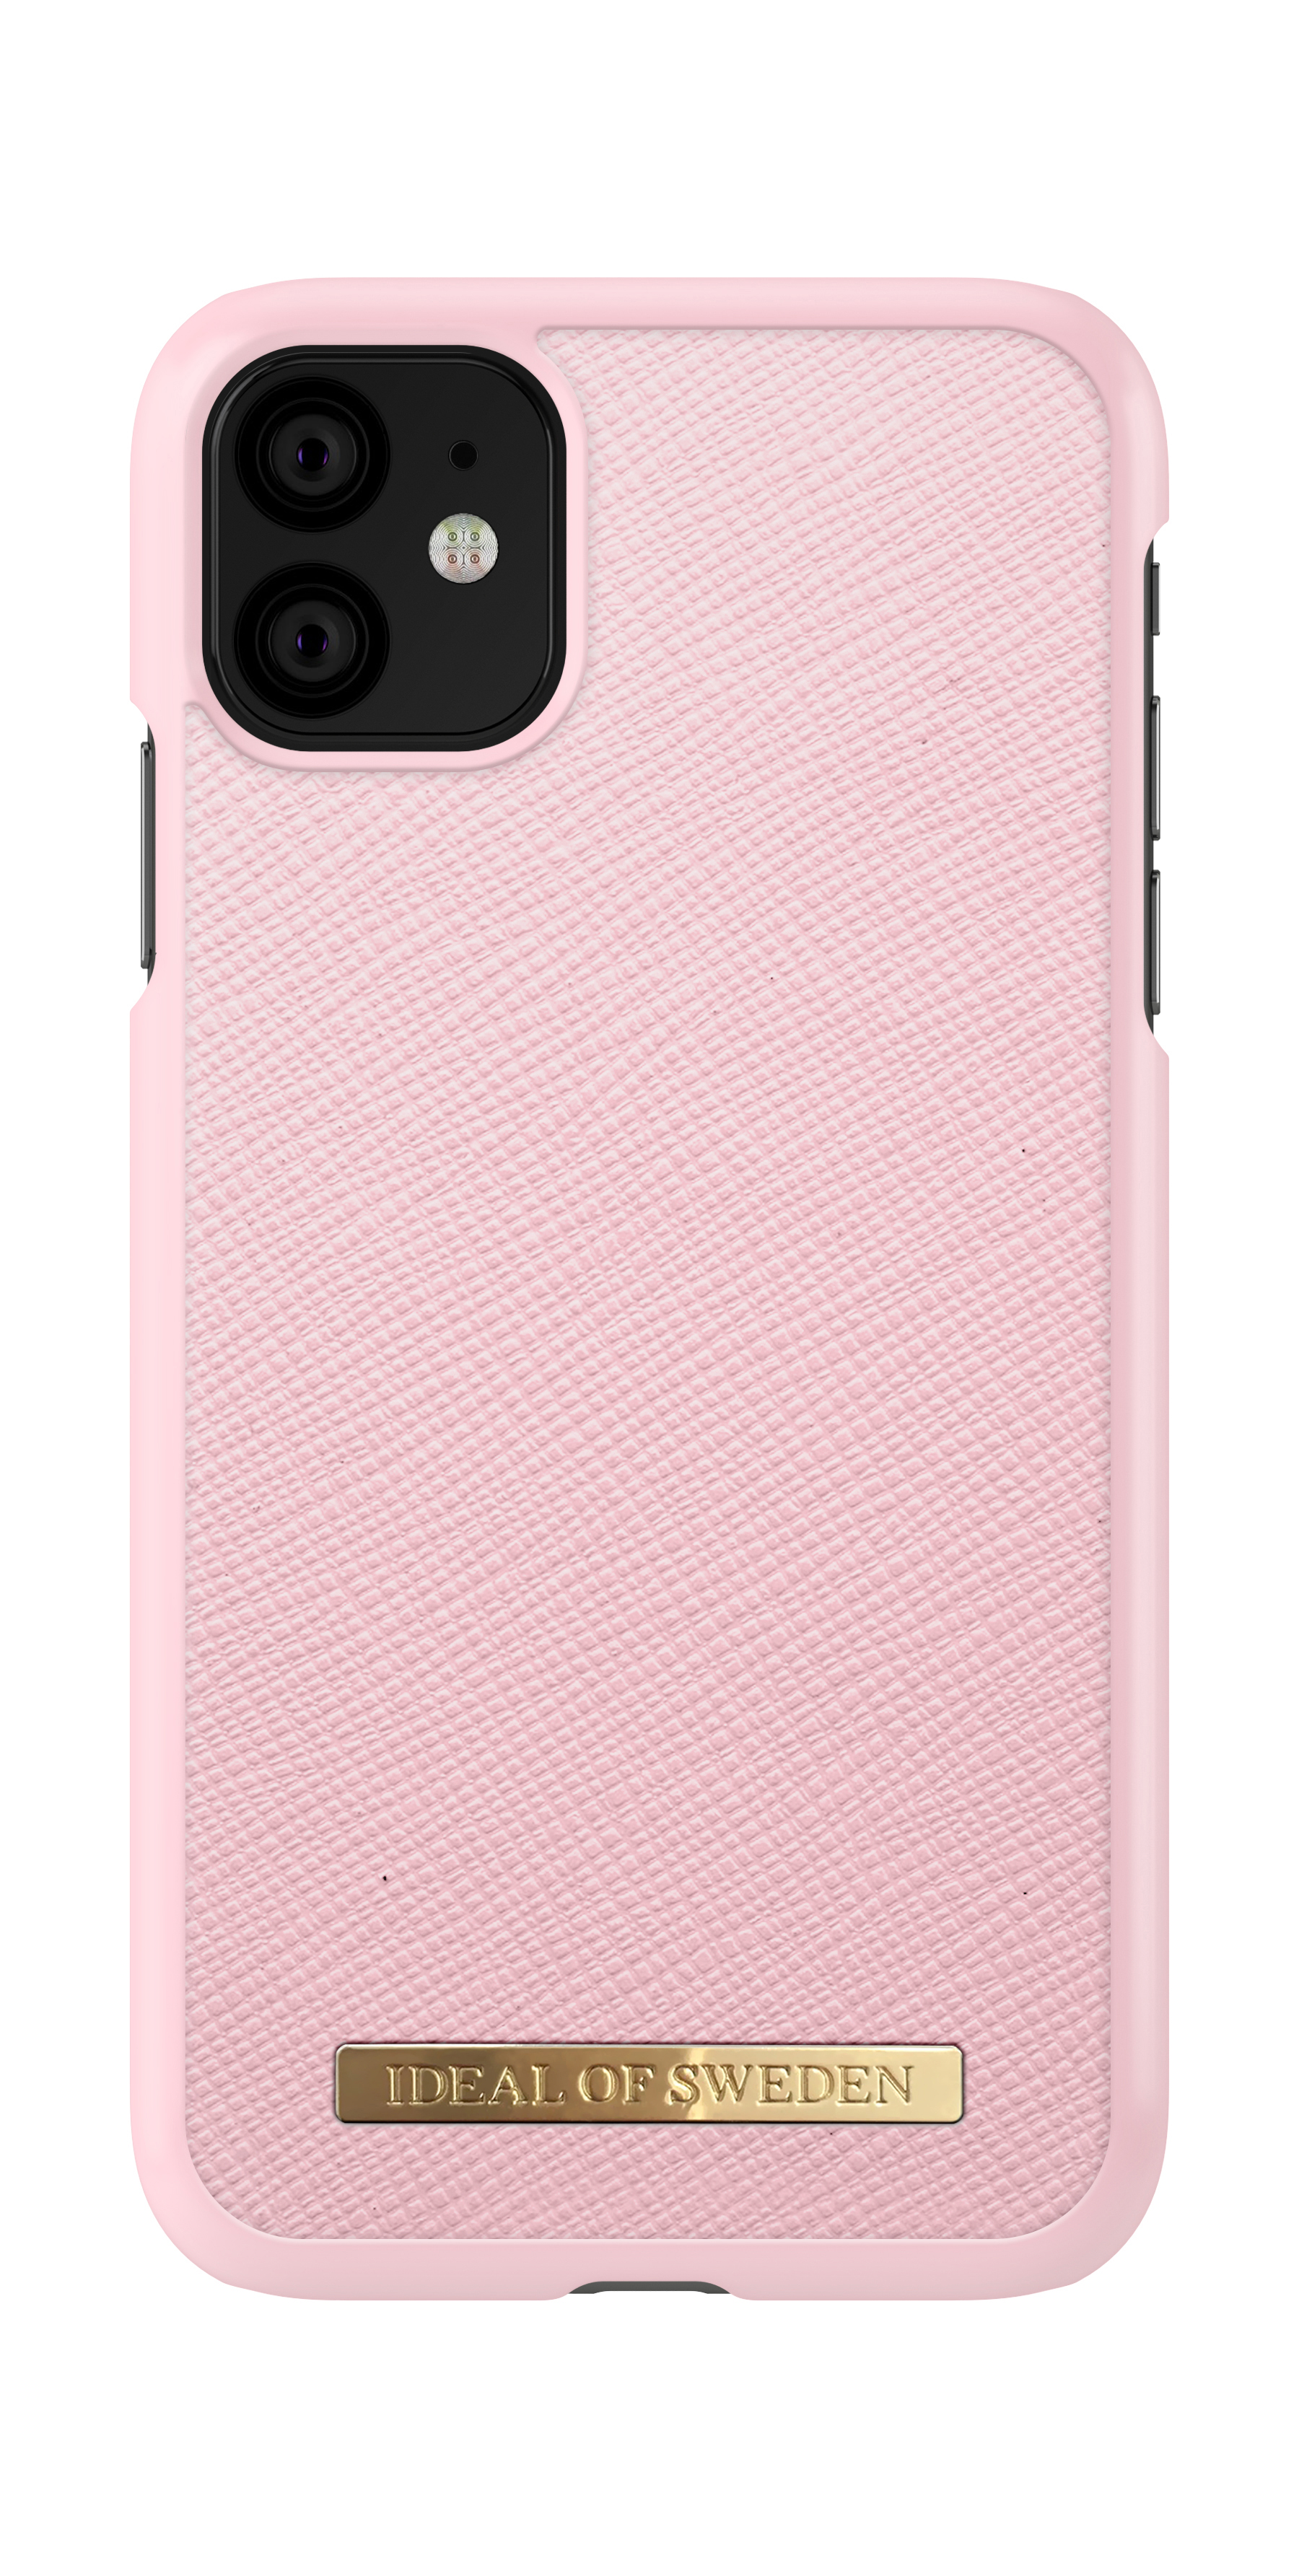 11, SWEDEN Rosa iPhone Backcover, Fashion Case, OF IDEAL Apple,